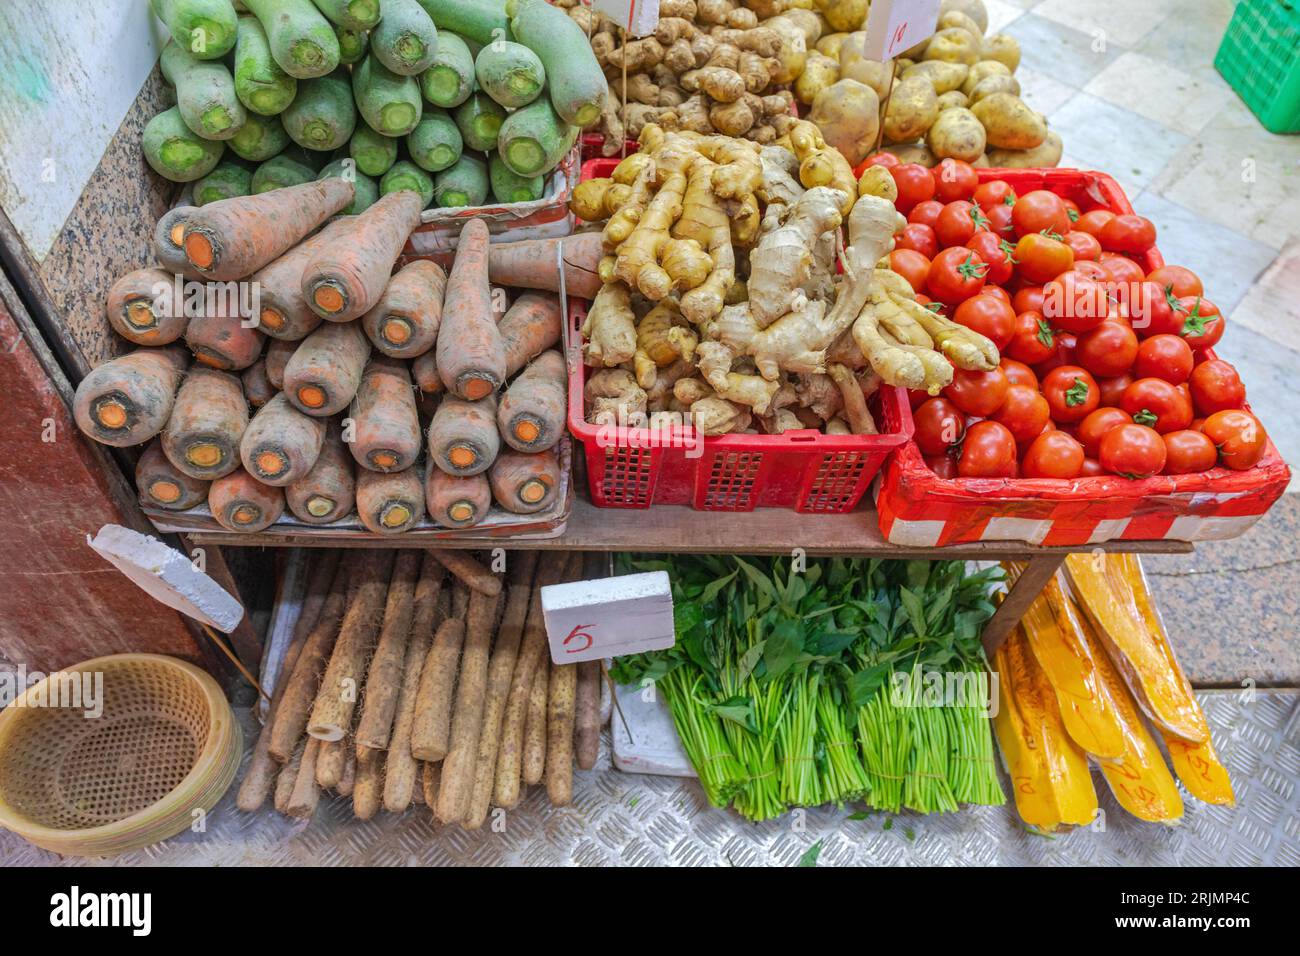 Roots Vegetables Food at Farmers Market in Hong Kong Stock Photo